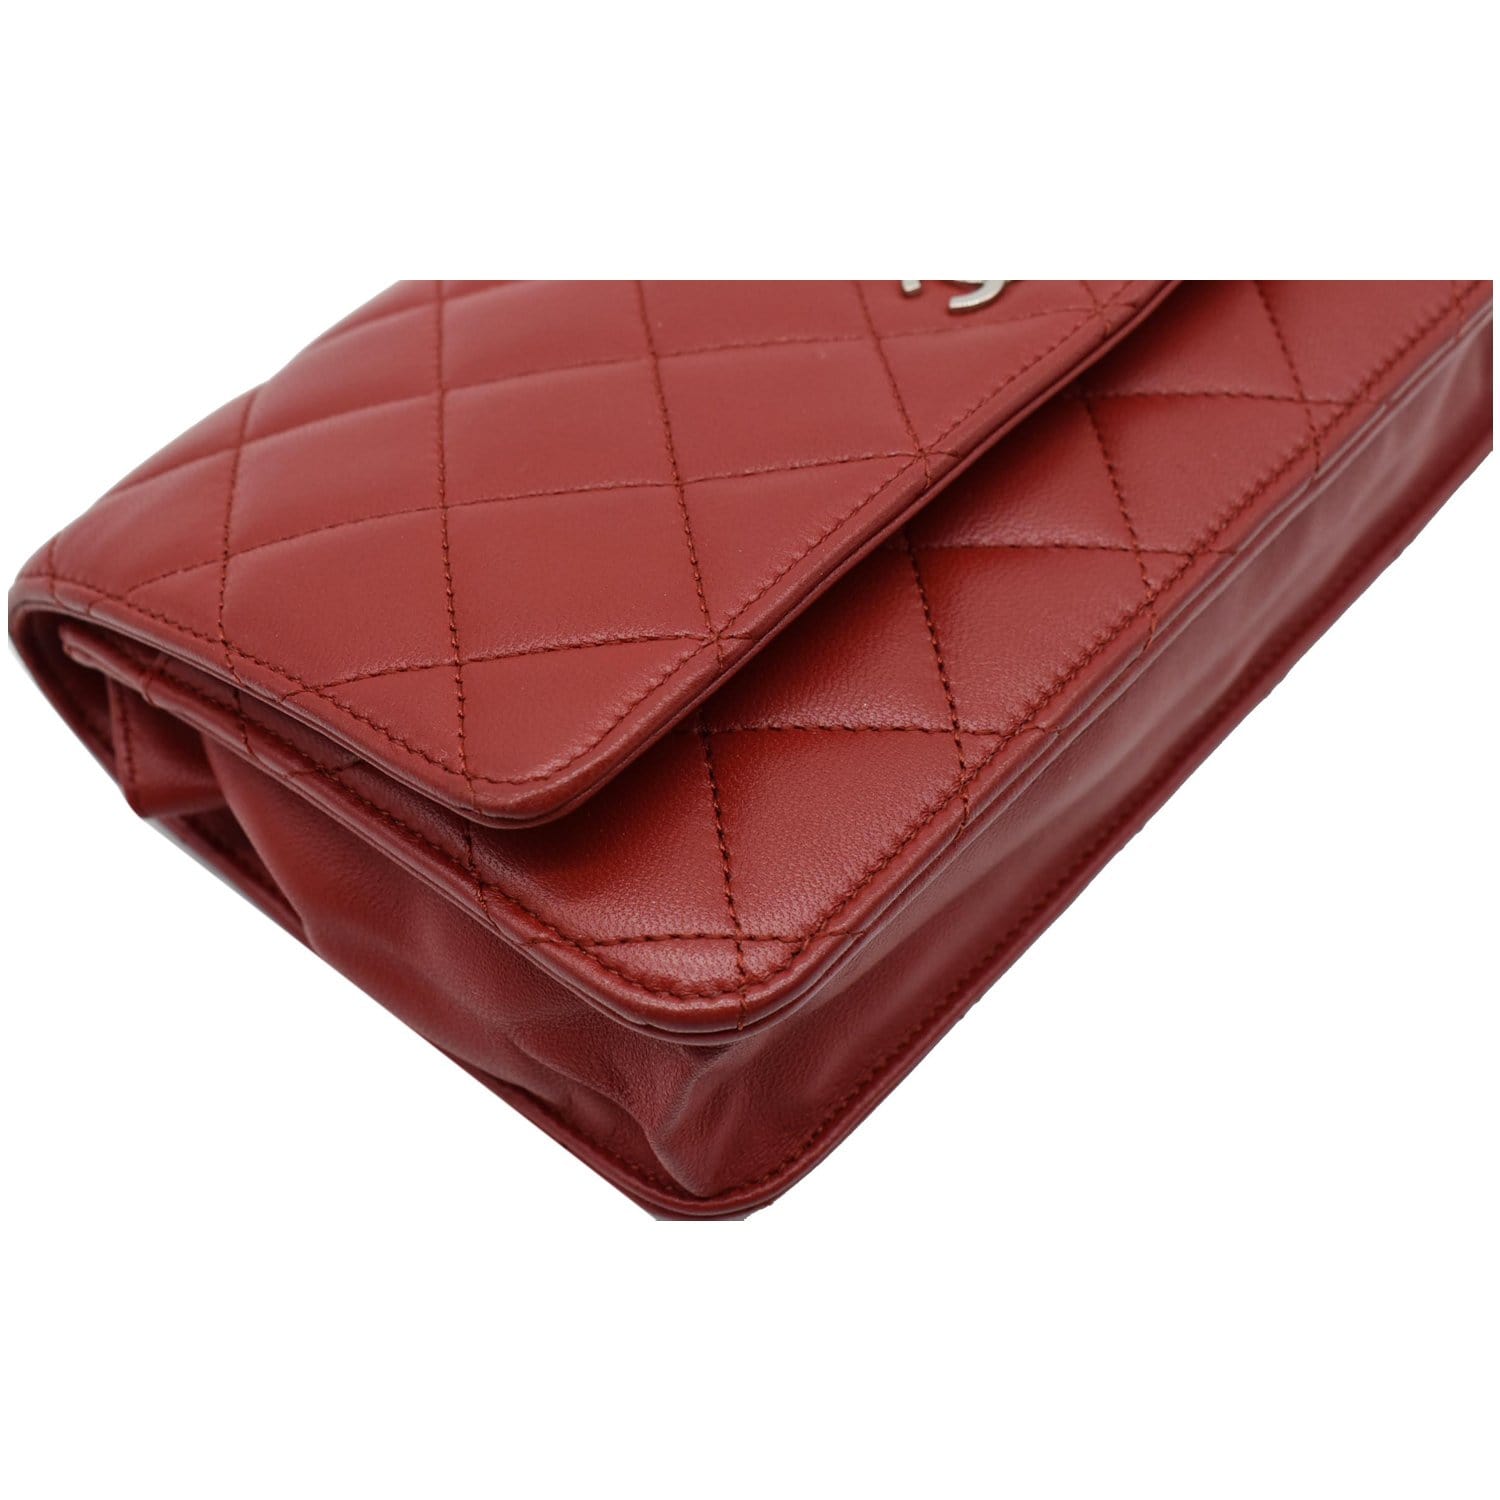 CHANEL WOC Lambskin Leather Chain Crossbody Bag Red